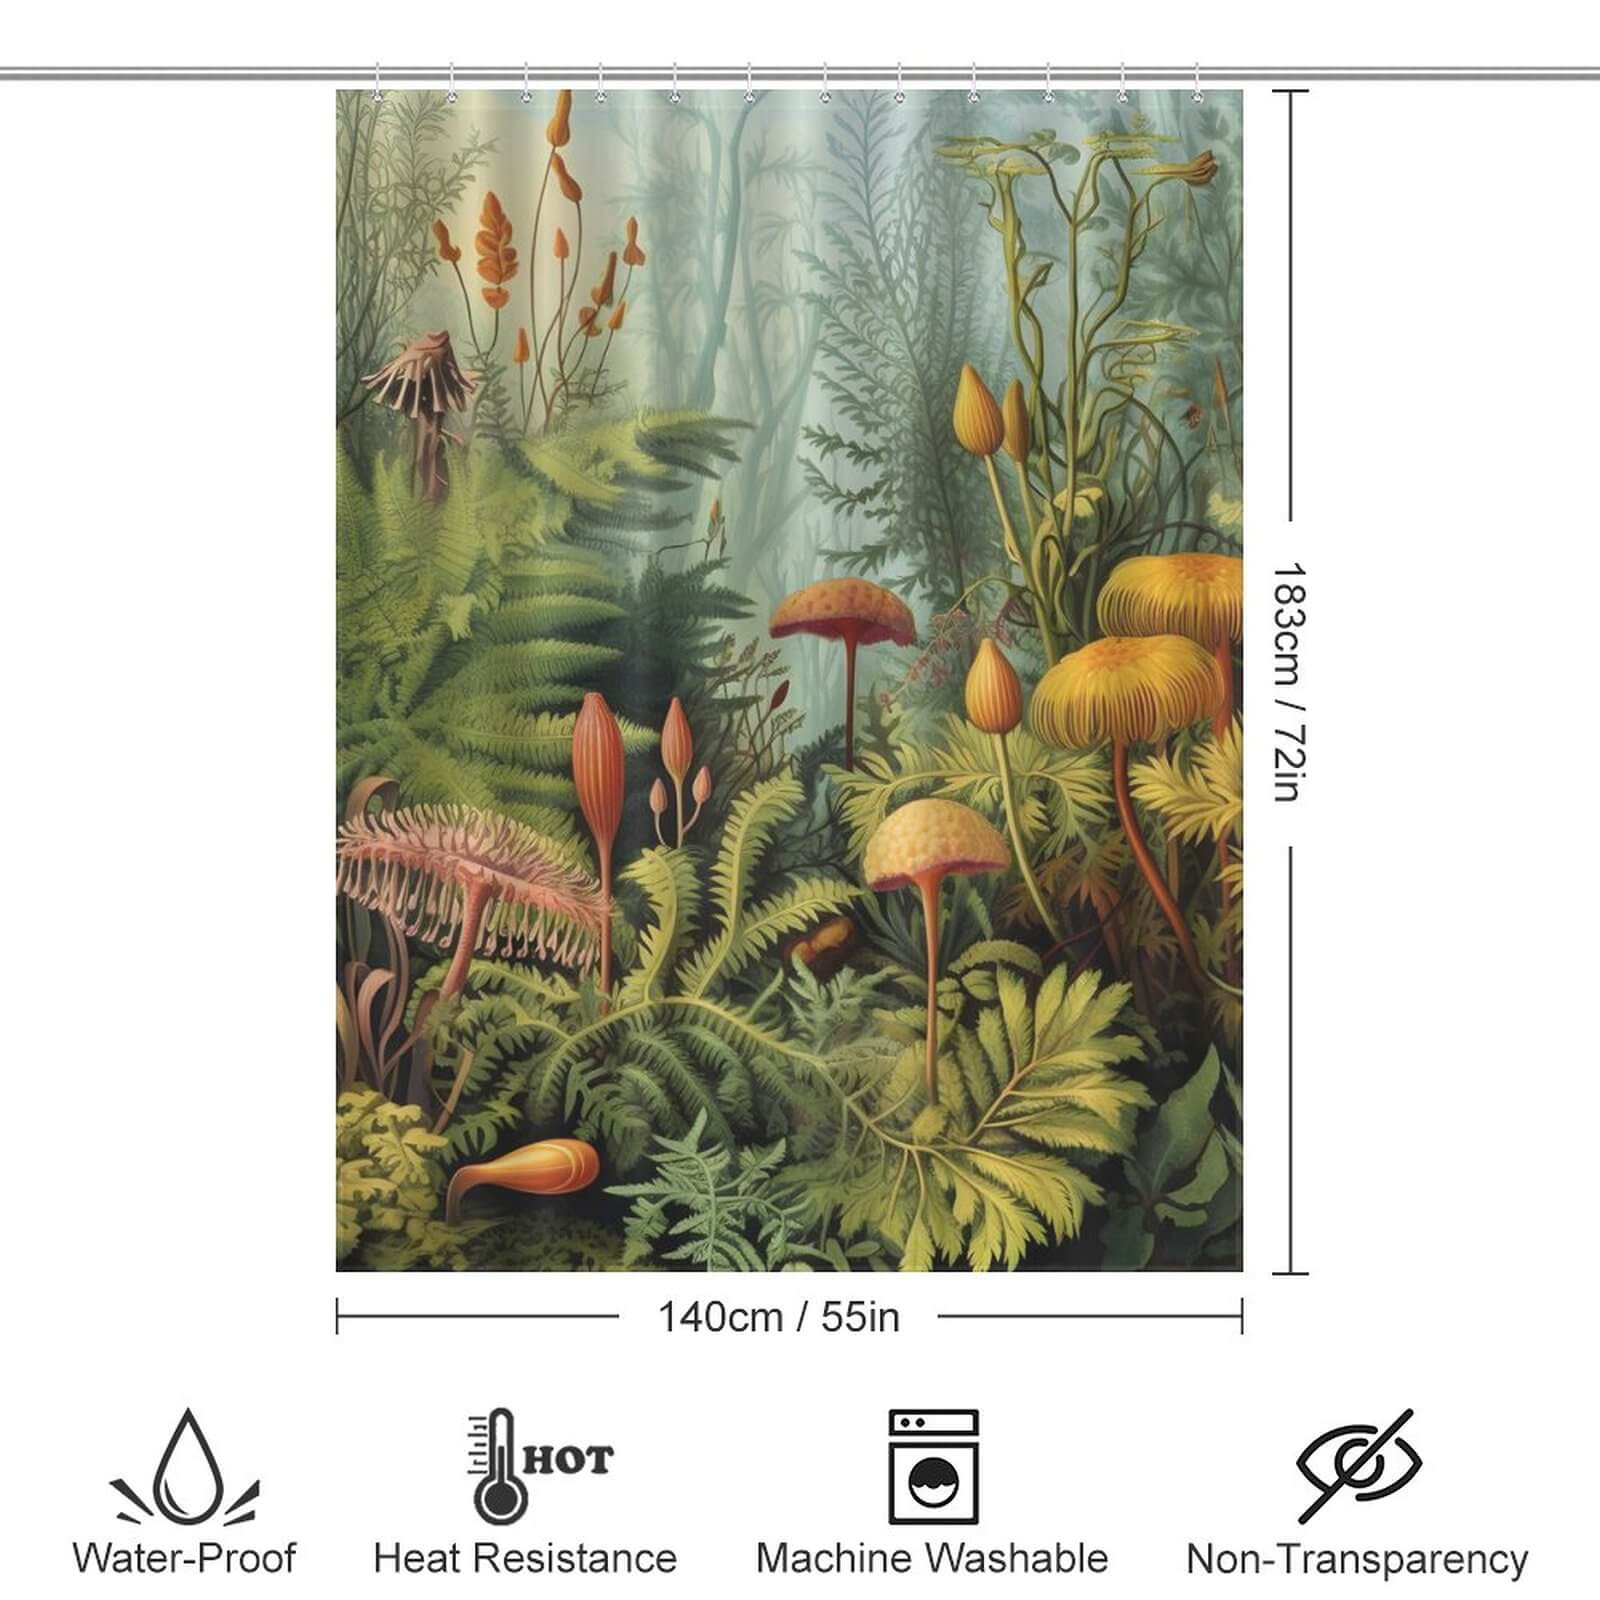 A Mushroom Jungle Shower Curtain by Cotton Cat, featuring a painting of a jungle with plants and mushrooms.